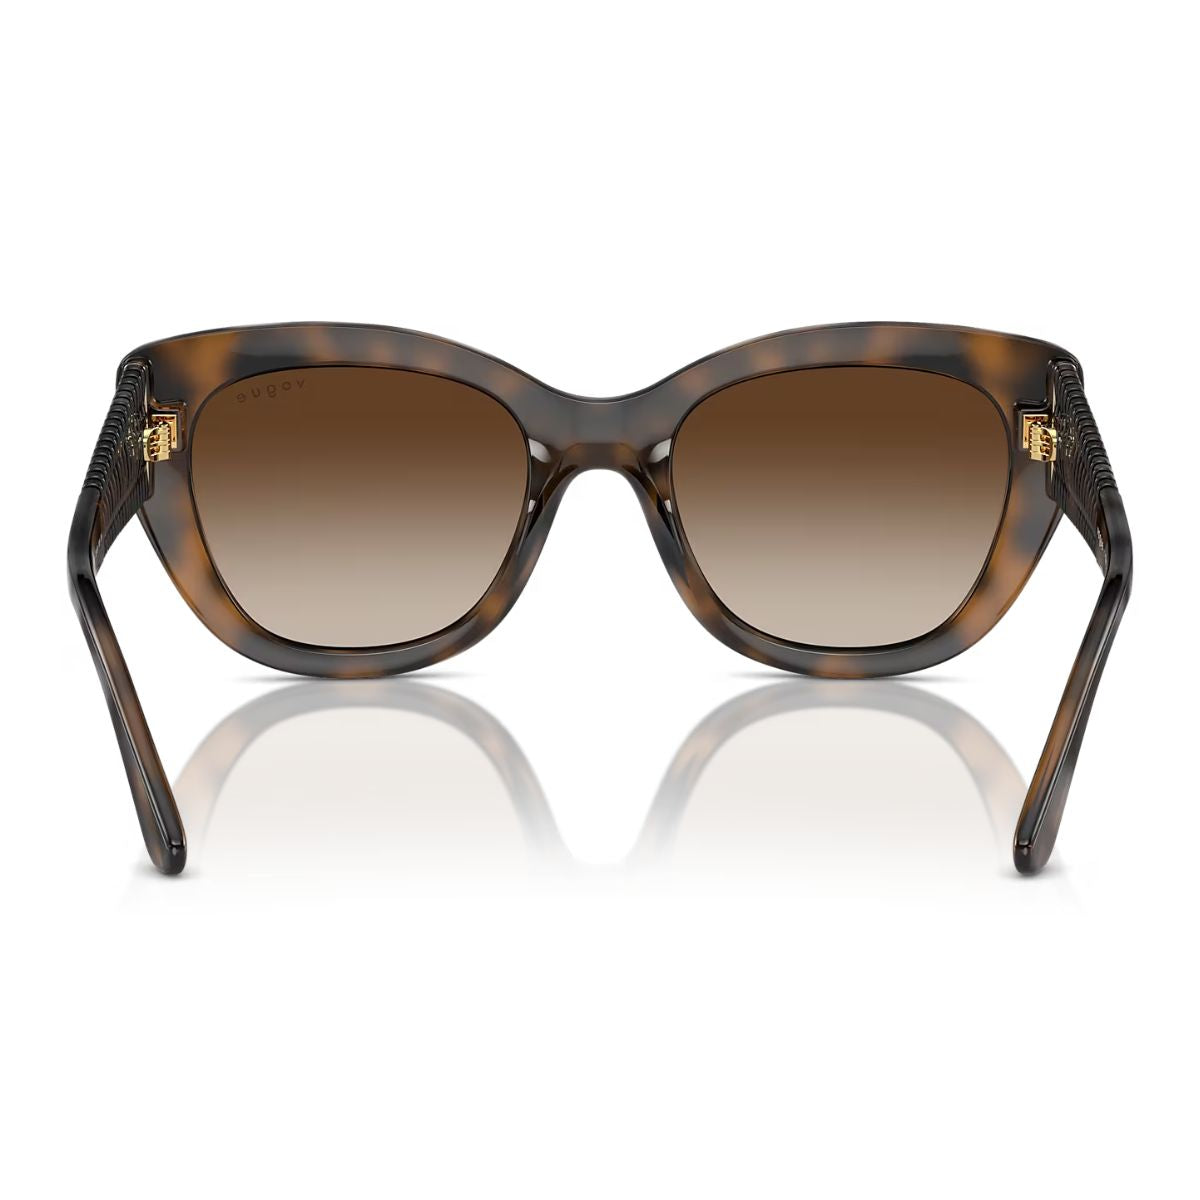 "Buy Vogue 5567 Havana Cat Eye Sunglasses for Women with UV protection at Optorium, free shipping in India."